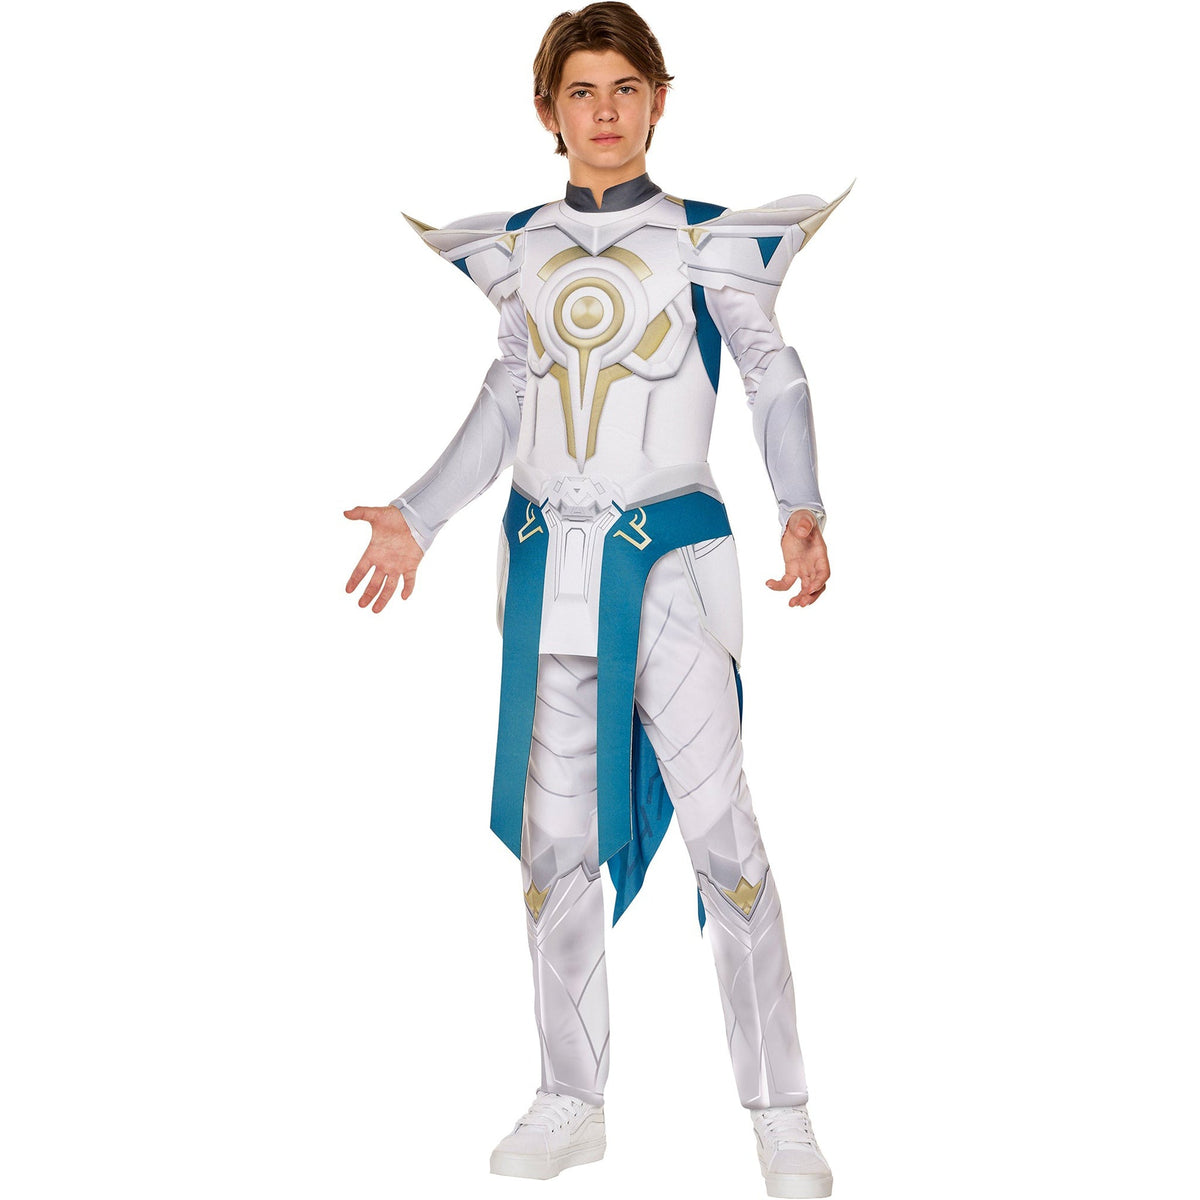 IN SPIRIT DESIGNS Costumes The Ageless Costume for Kids, Fortnite, White and Gold Jumpsuit